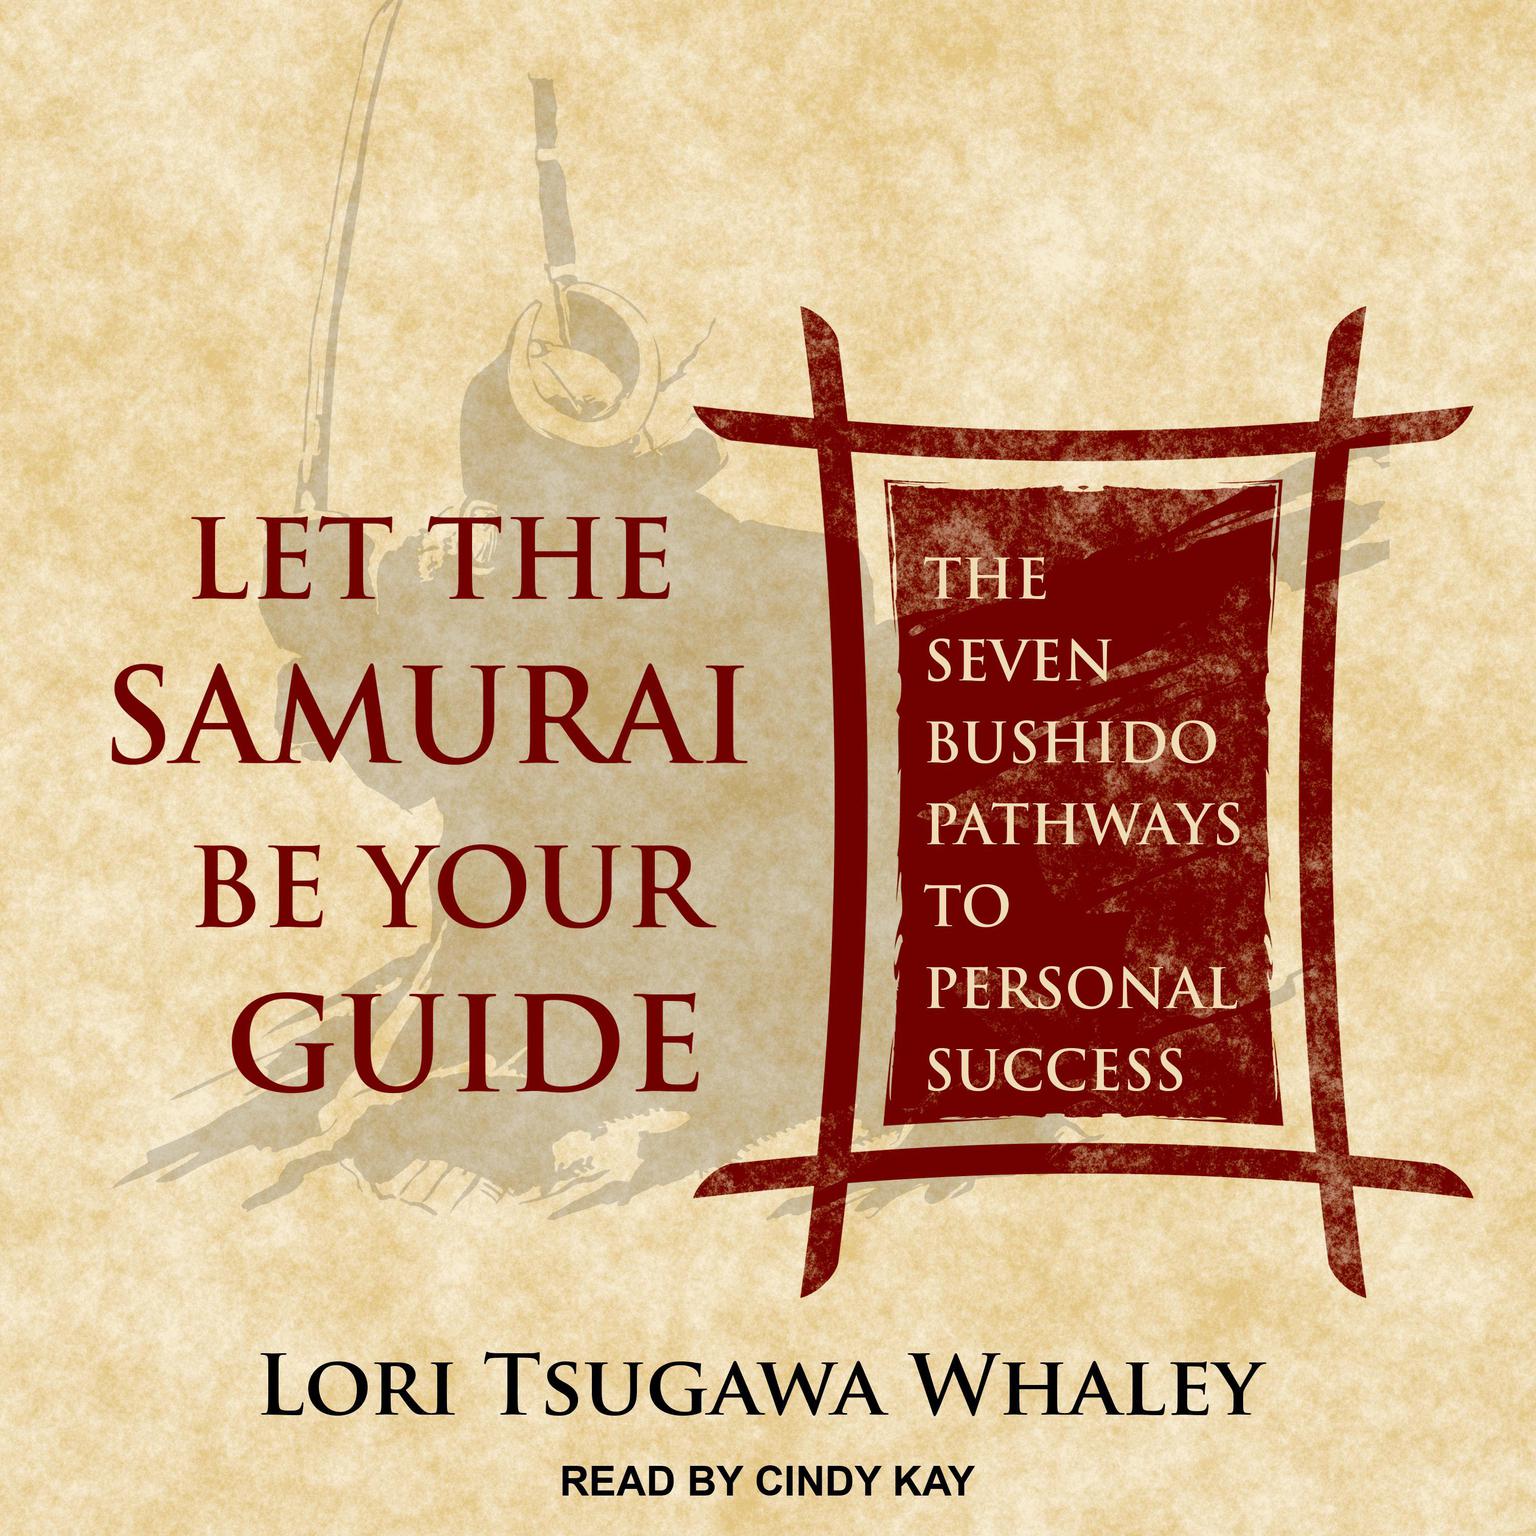 Let the Samurai Be Your Guide: The Seven Bushido Pathways to Personal Success Audiobook, by Lori Tsugawa Whaley